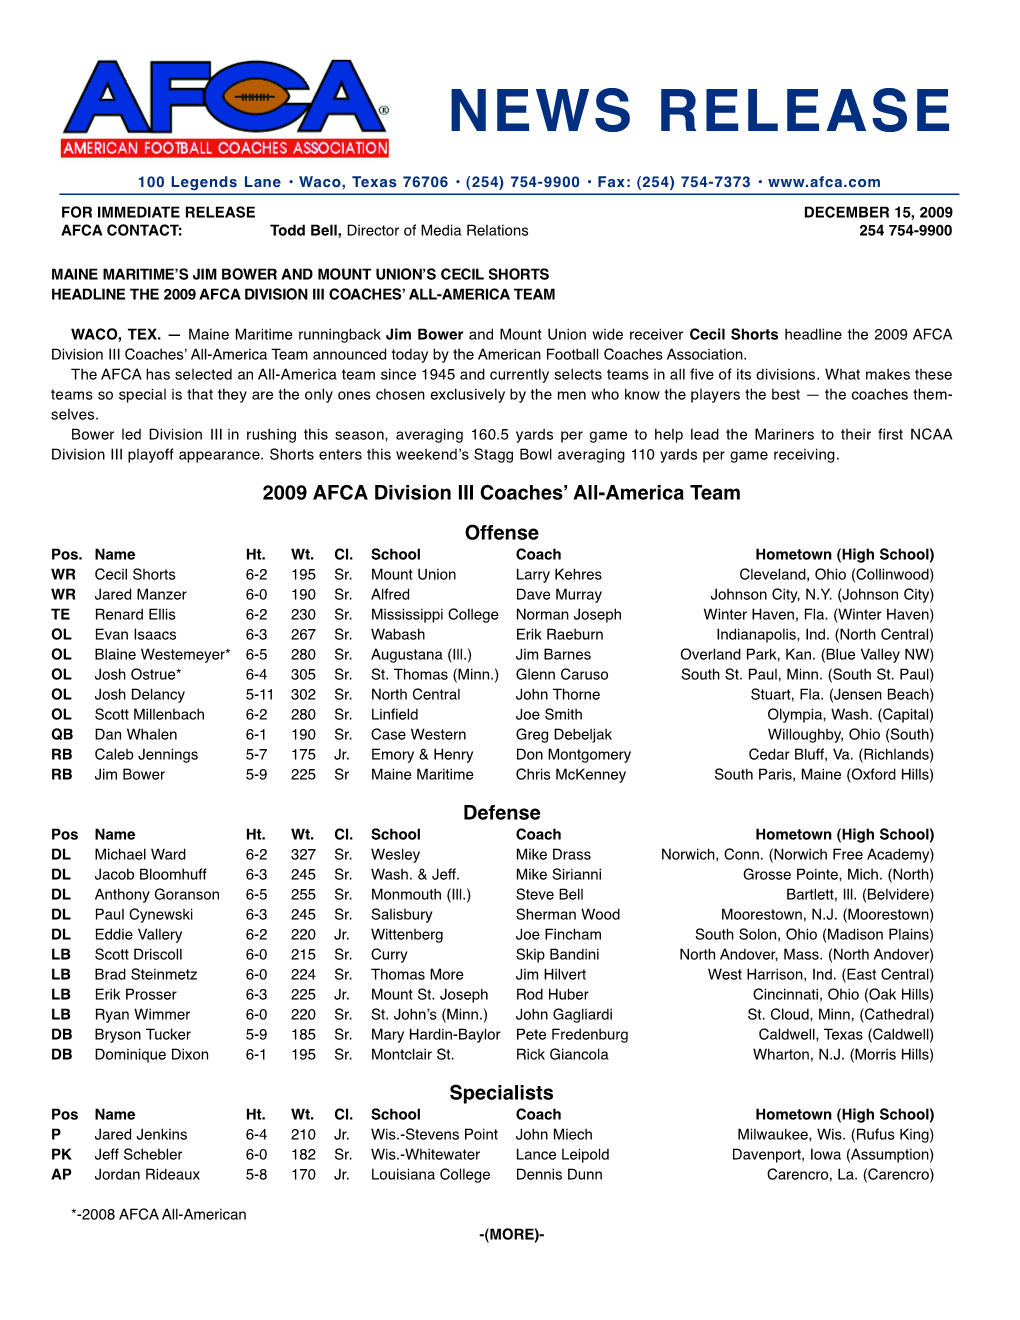 2009 American Football Coaches Association Division III All-America